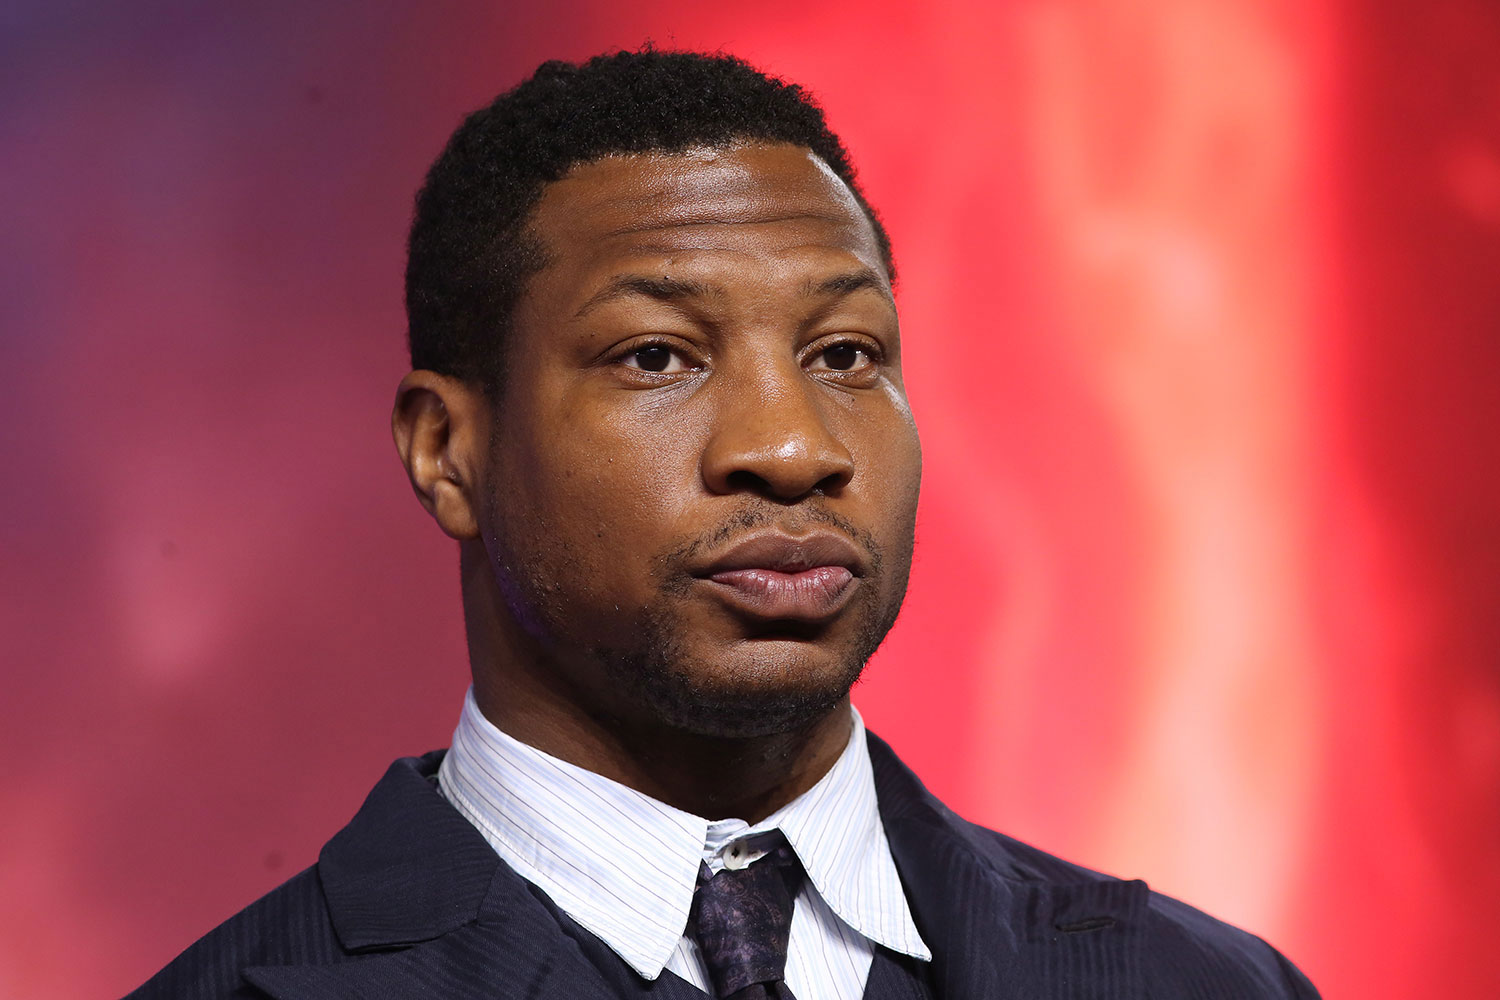 Jonathan Majors' accuser granted full temporary protection order after alleged domestic dispute